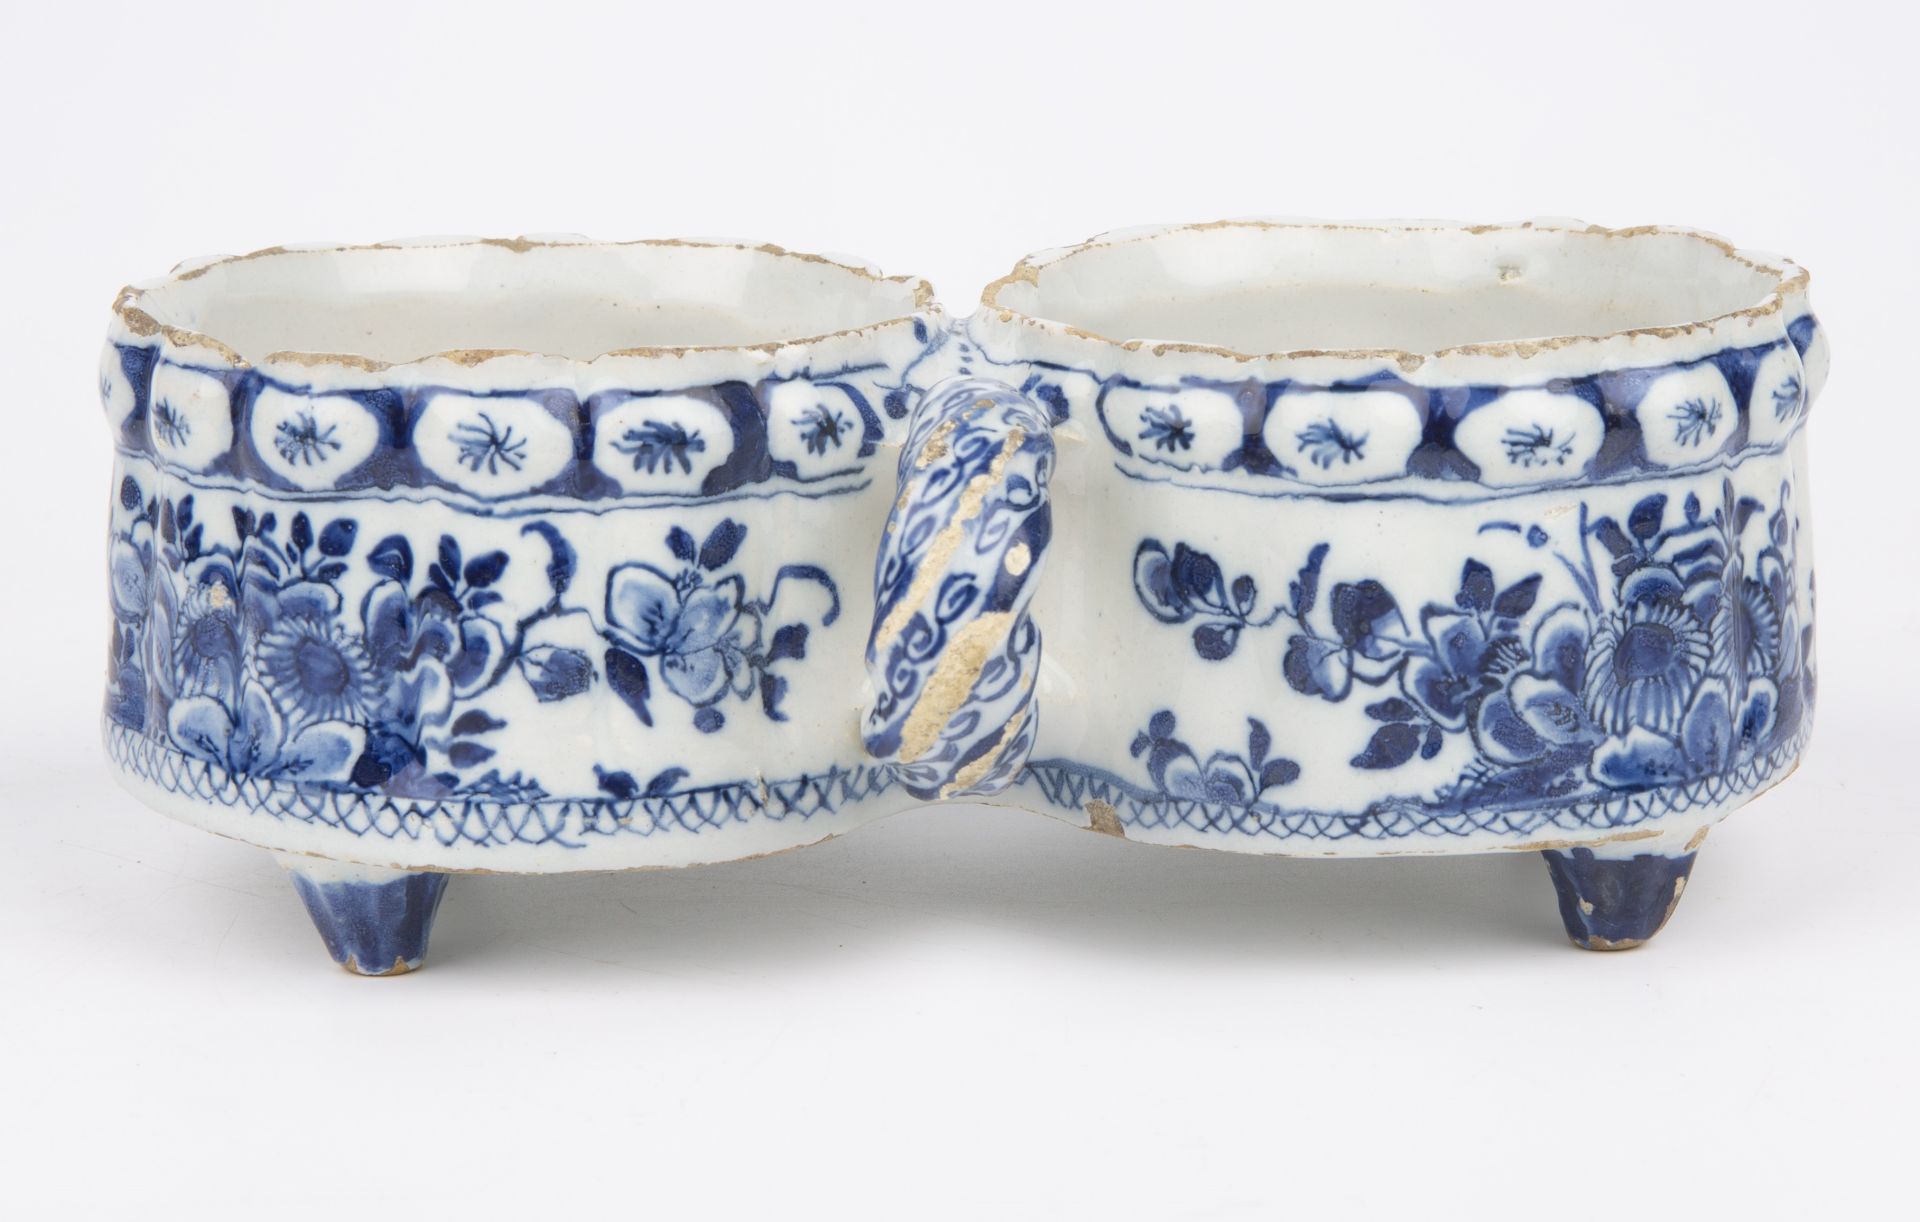 An early 18th century Delft cruet cira 1720, 19.5cm wide 7cm high Good with glaze chips - Image 2 of 6